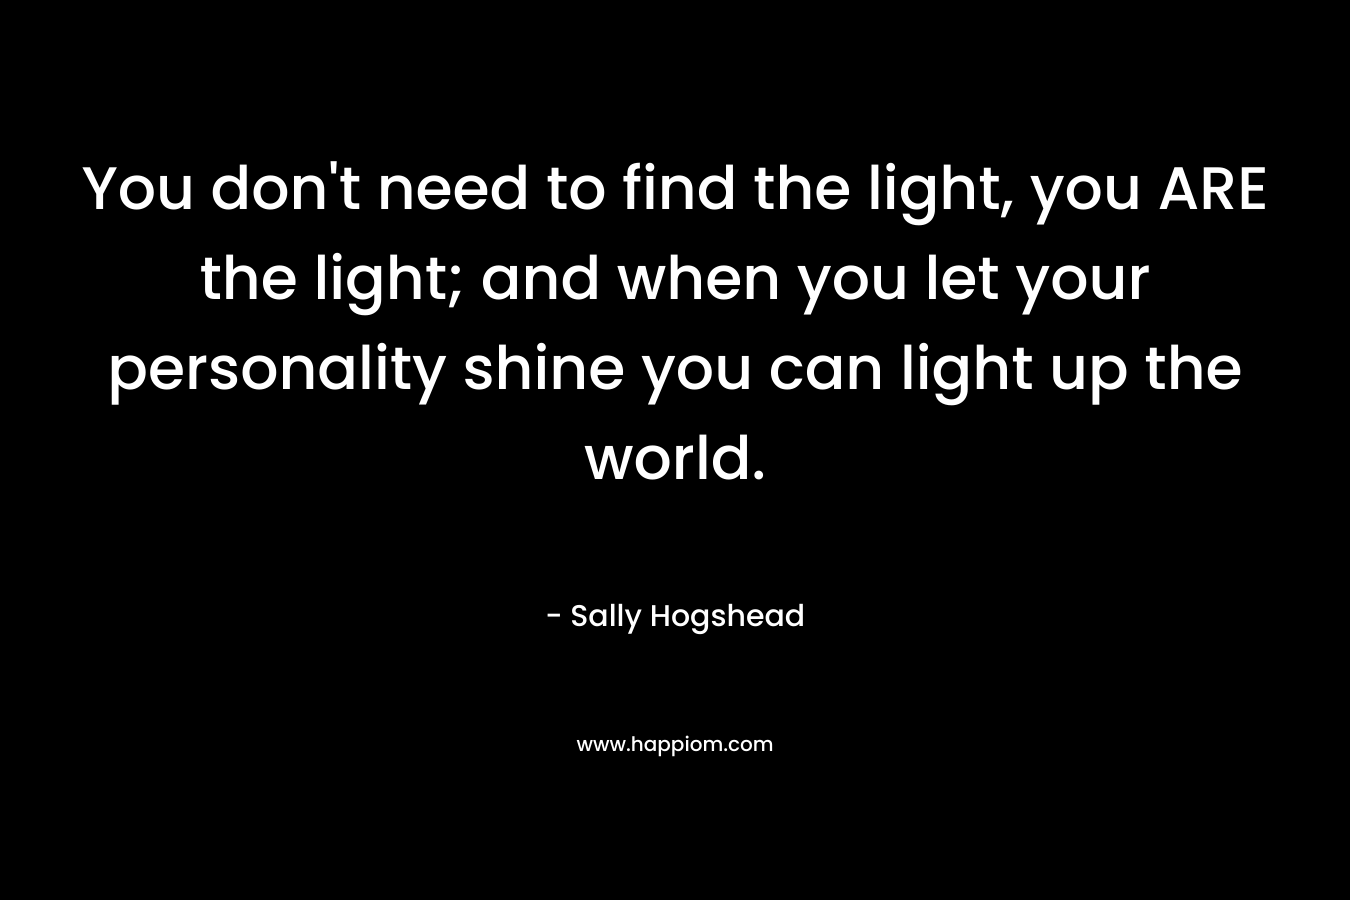 You don't need to find the light, you ARE the light; and when you let your personality shine you can light up the world.